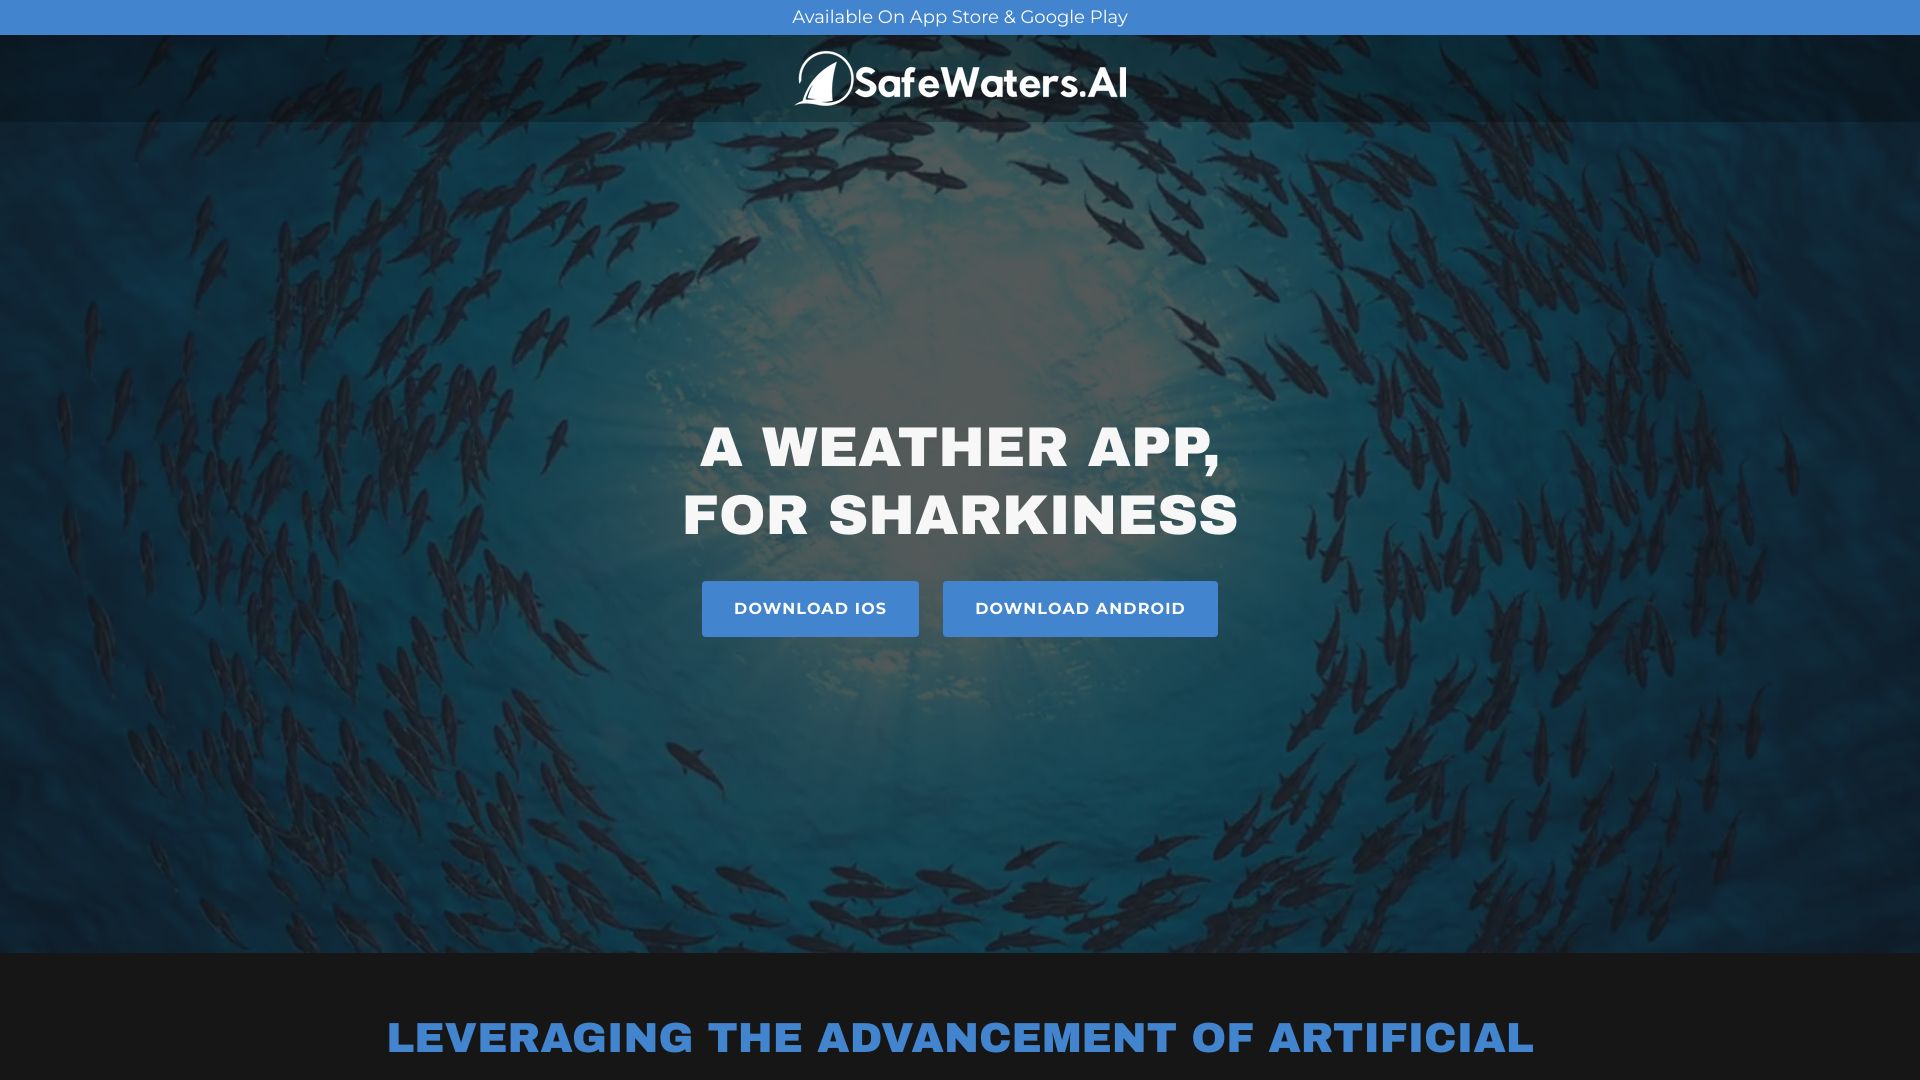 SafeWaters.ai